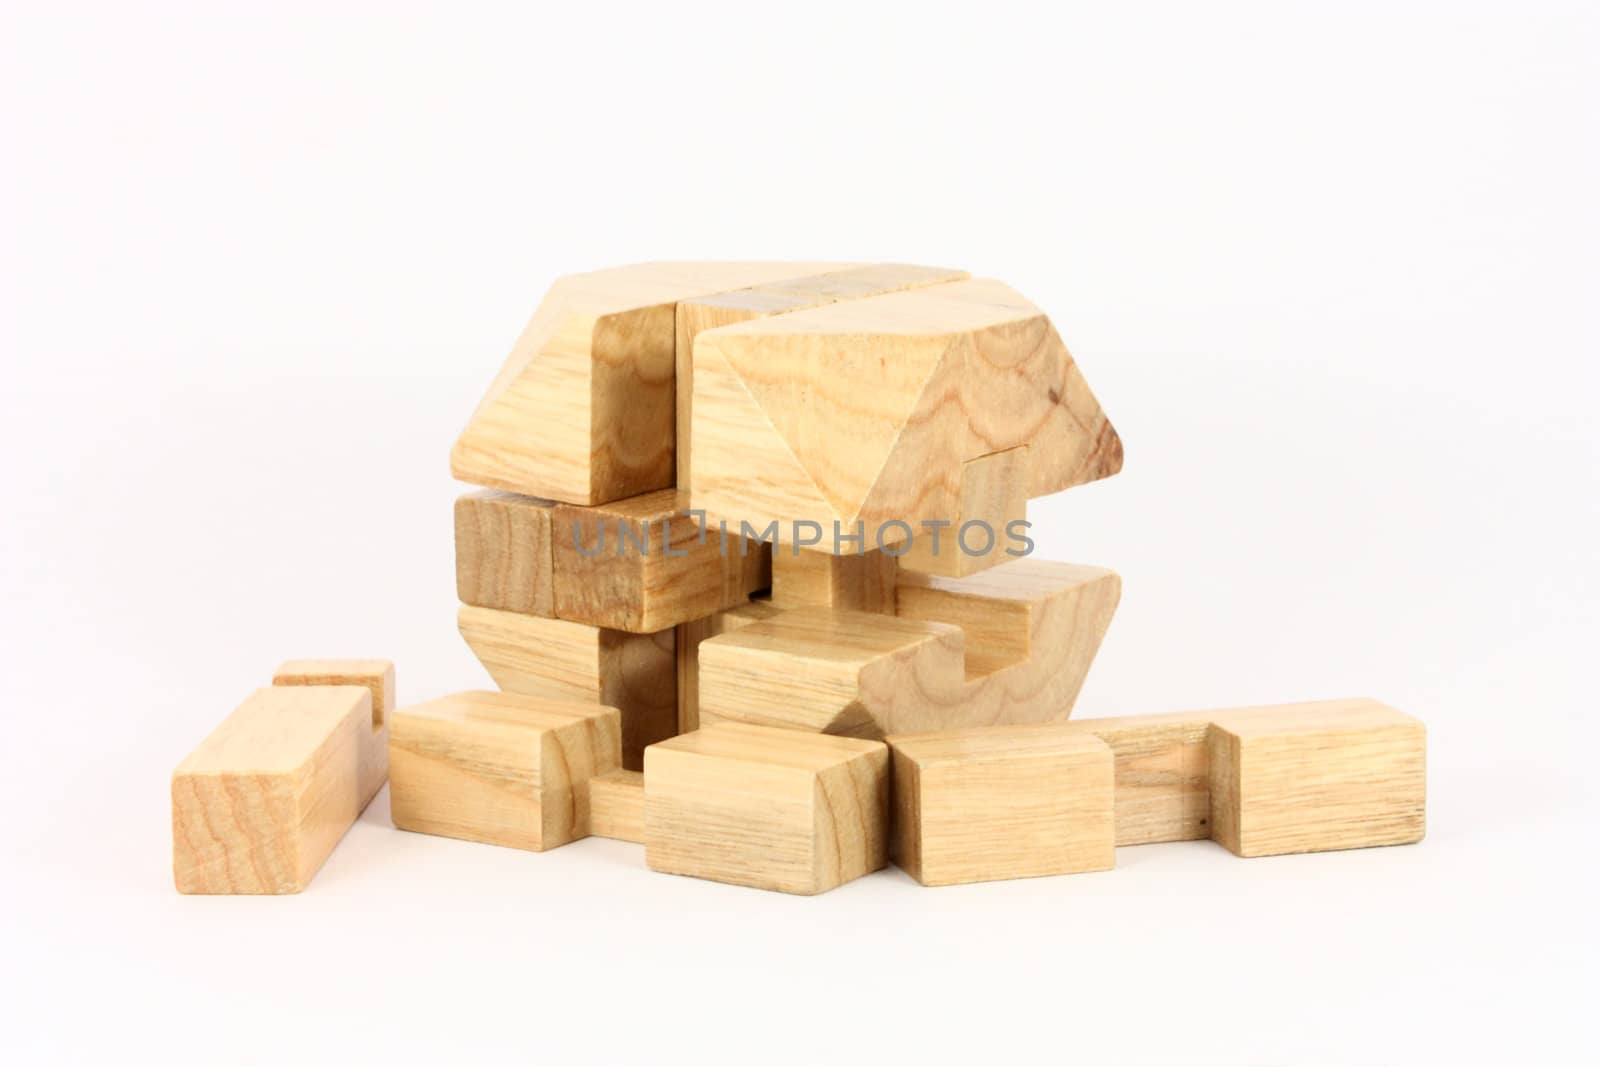 Wooden puzzle on an white background by Boris15